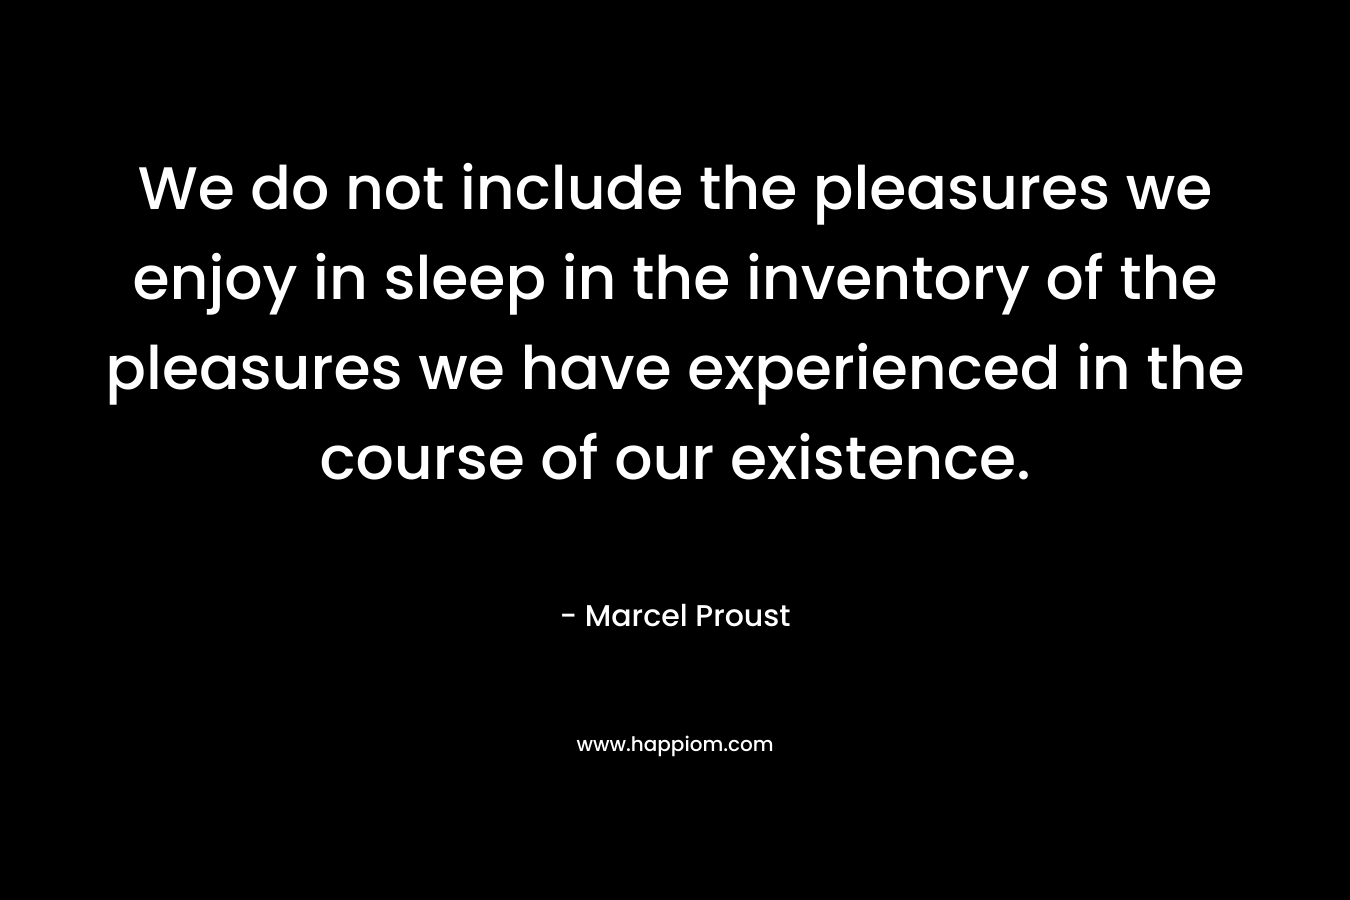 We do not include the pleasures we enjoy in sleep in the inventory of the pleasures we have experienced in the course of our existence. – Marcel Proust